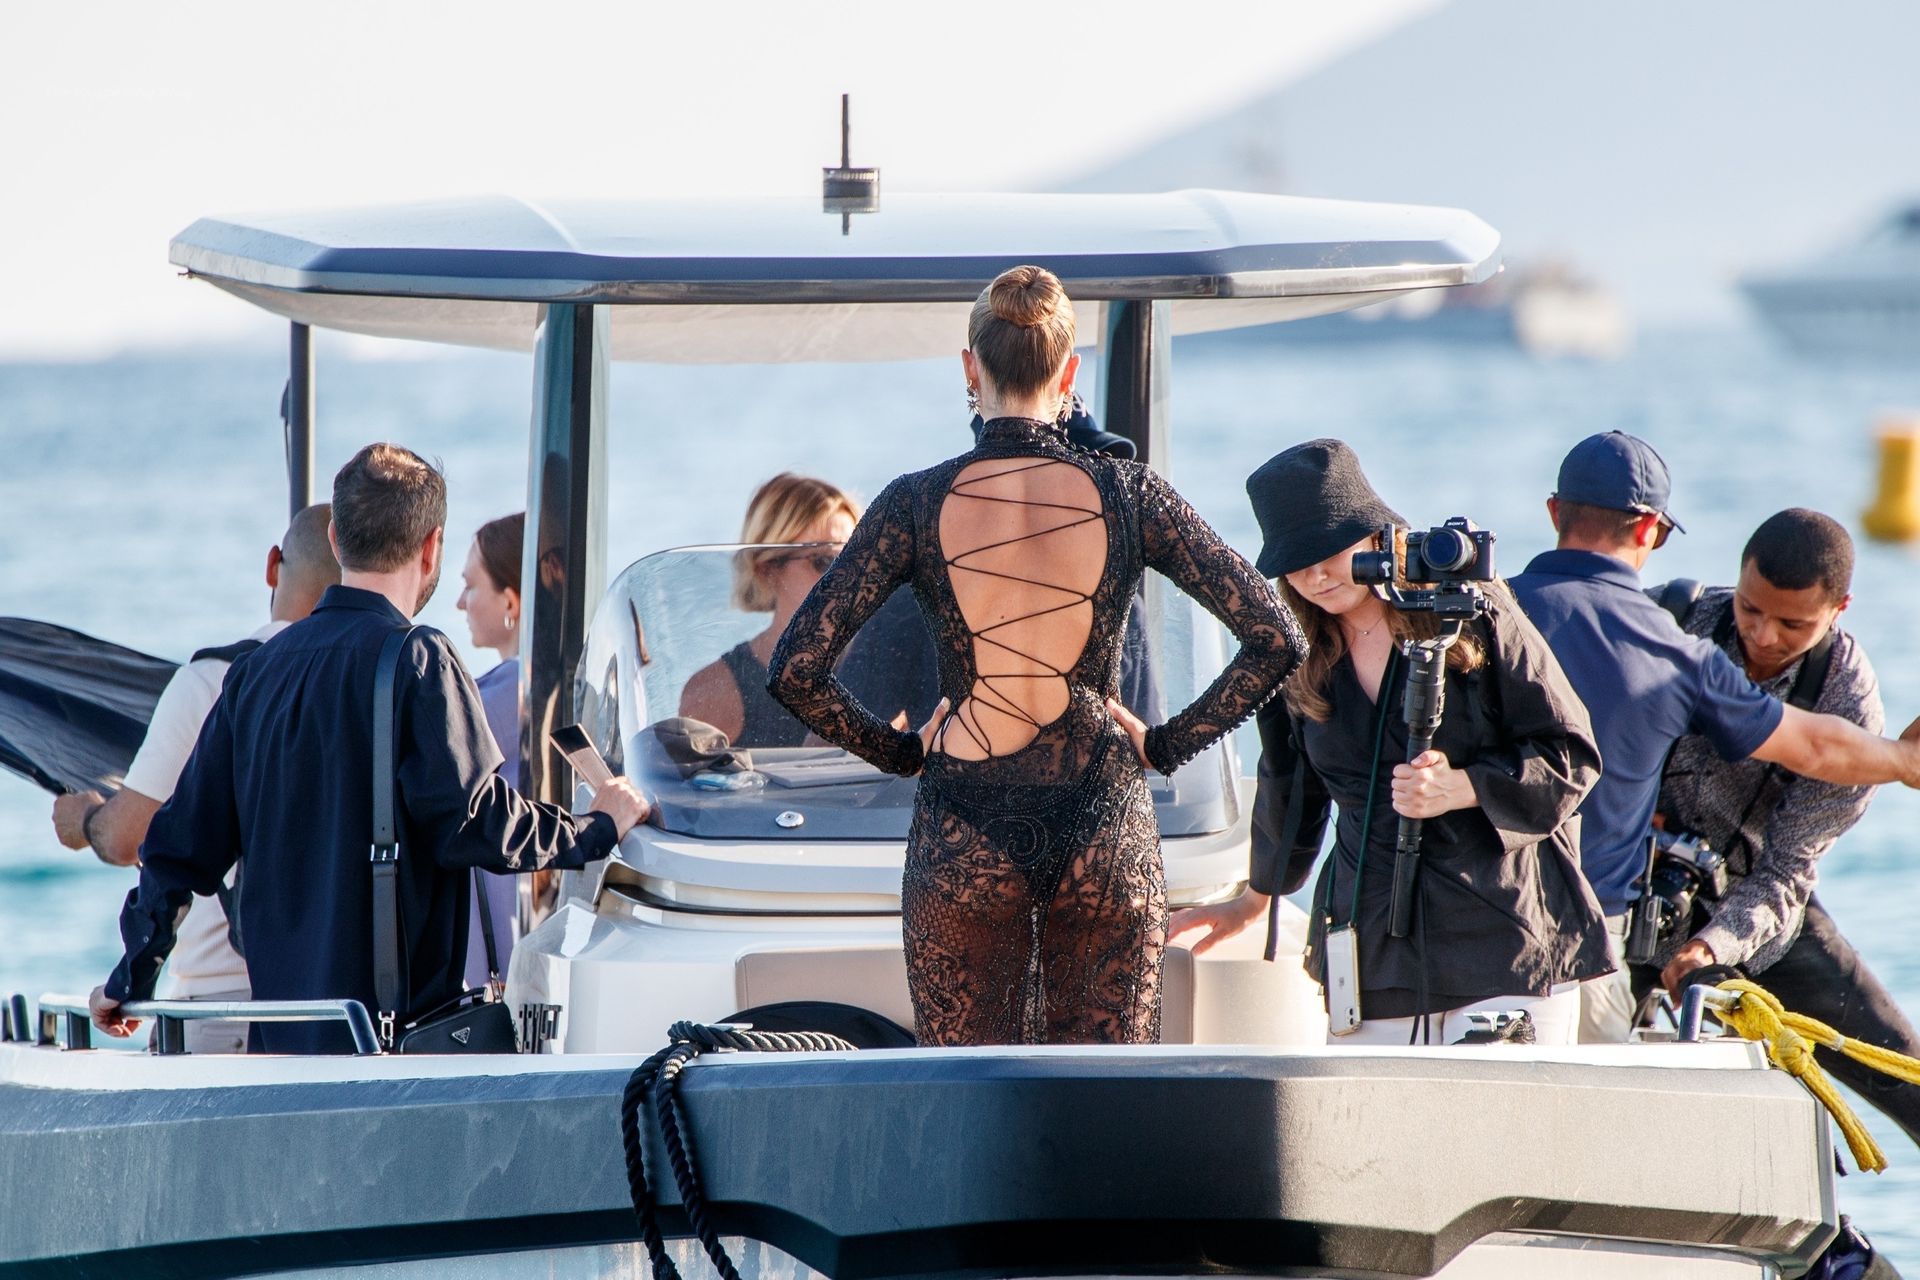 Taylor Hill Poses on a Photoshoot on a Boat in C
annes (73 Photos)